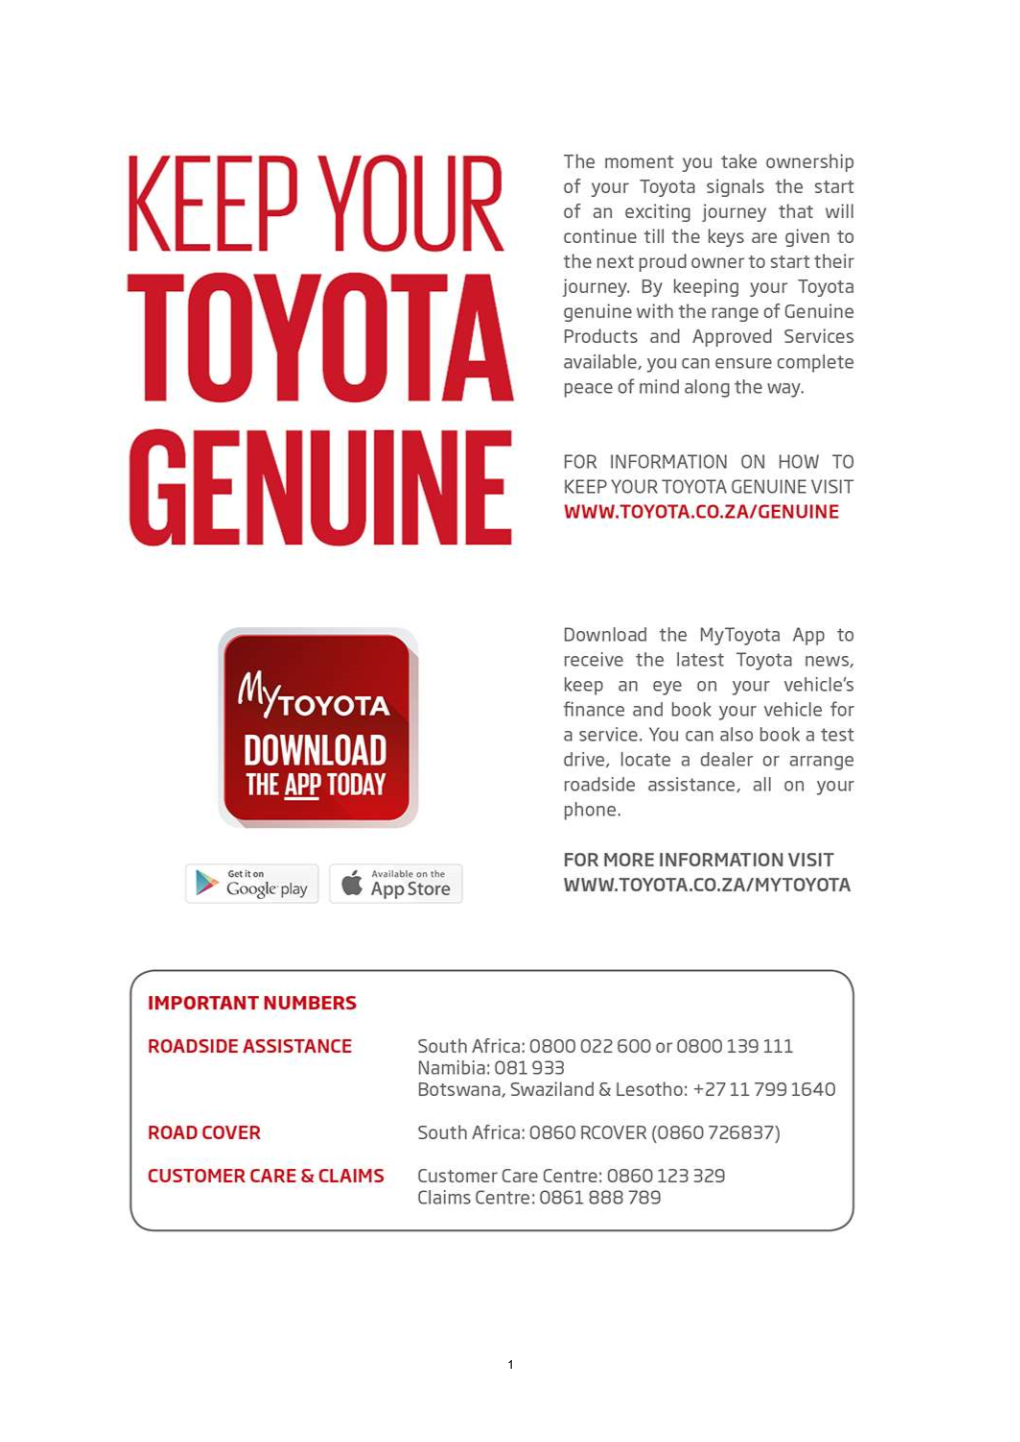 Toyota Genuine Unlimited Warranty Enjoys Full Backing by Toyota South Africa Motors (Pty) Ltd and Offers Unlimited Cover on All Items Specified